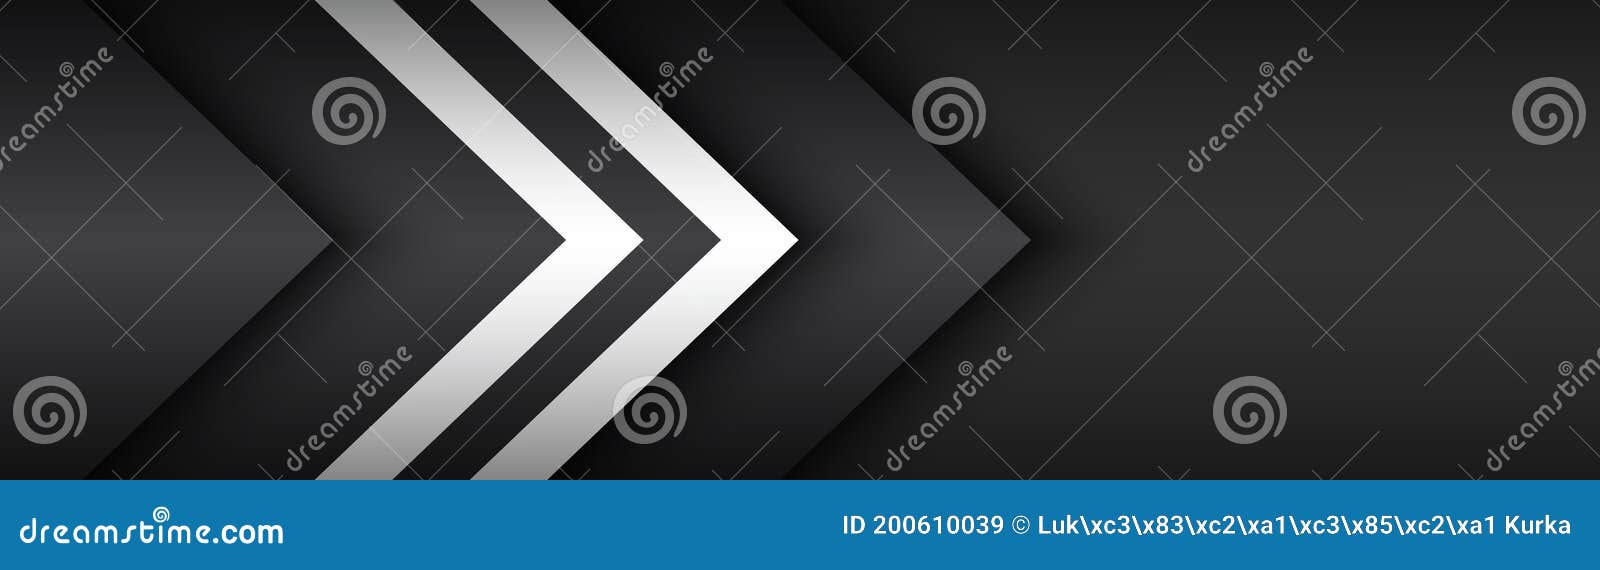 black and white overlayed arrows. abstract modern  header with place for your text